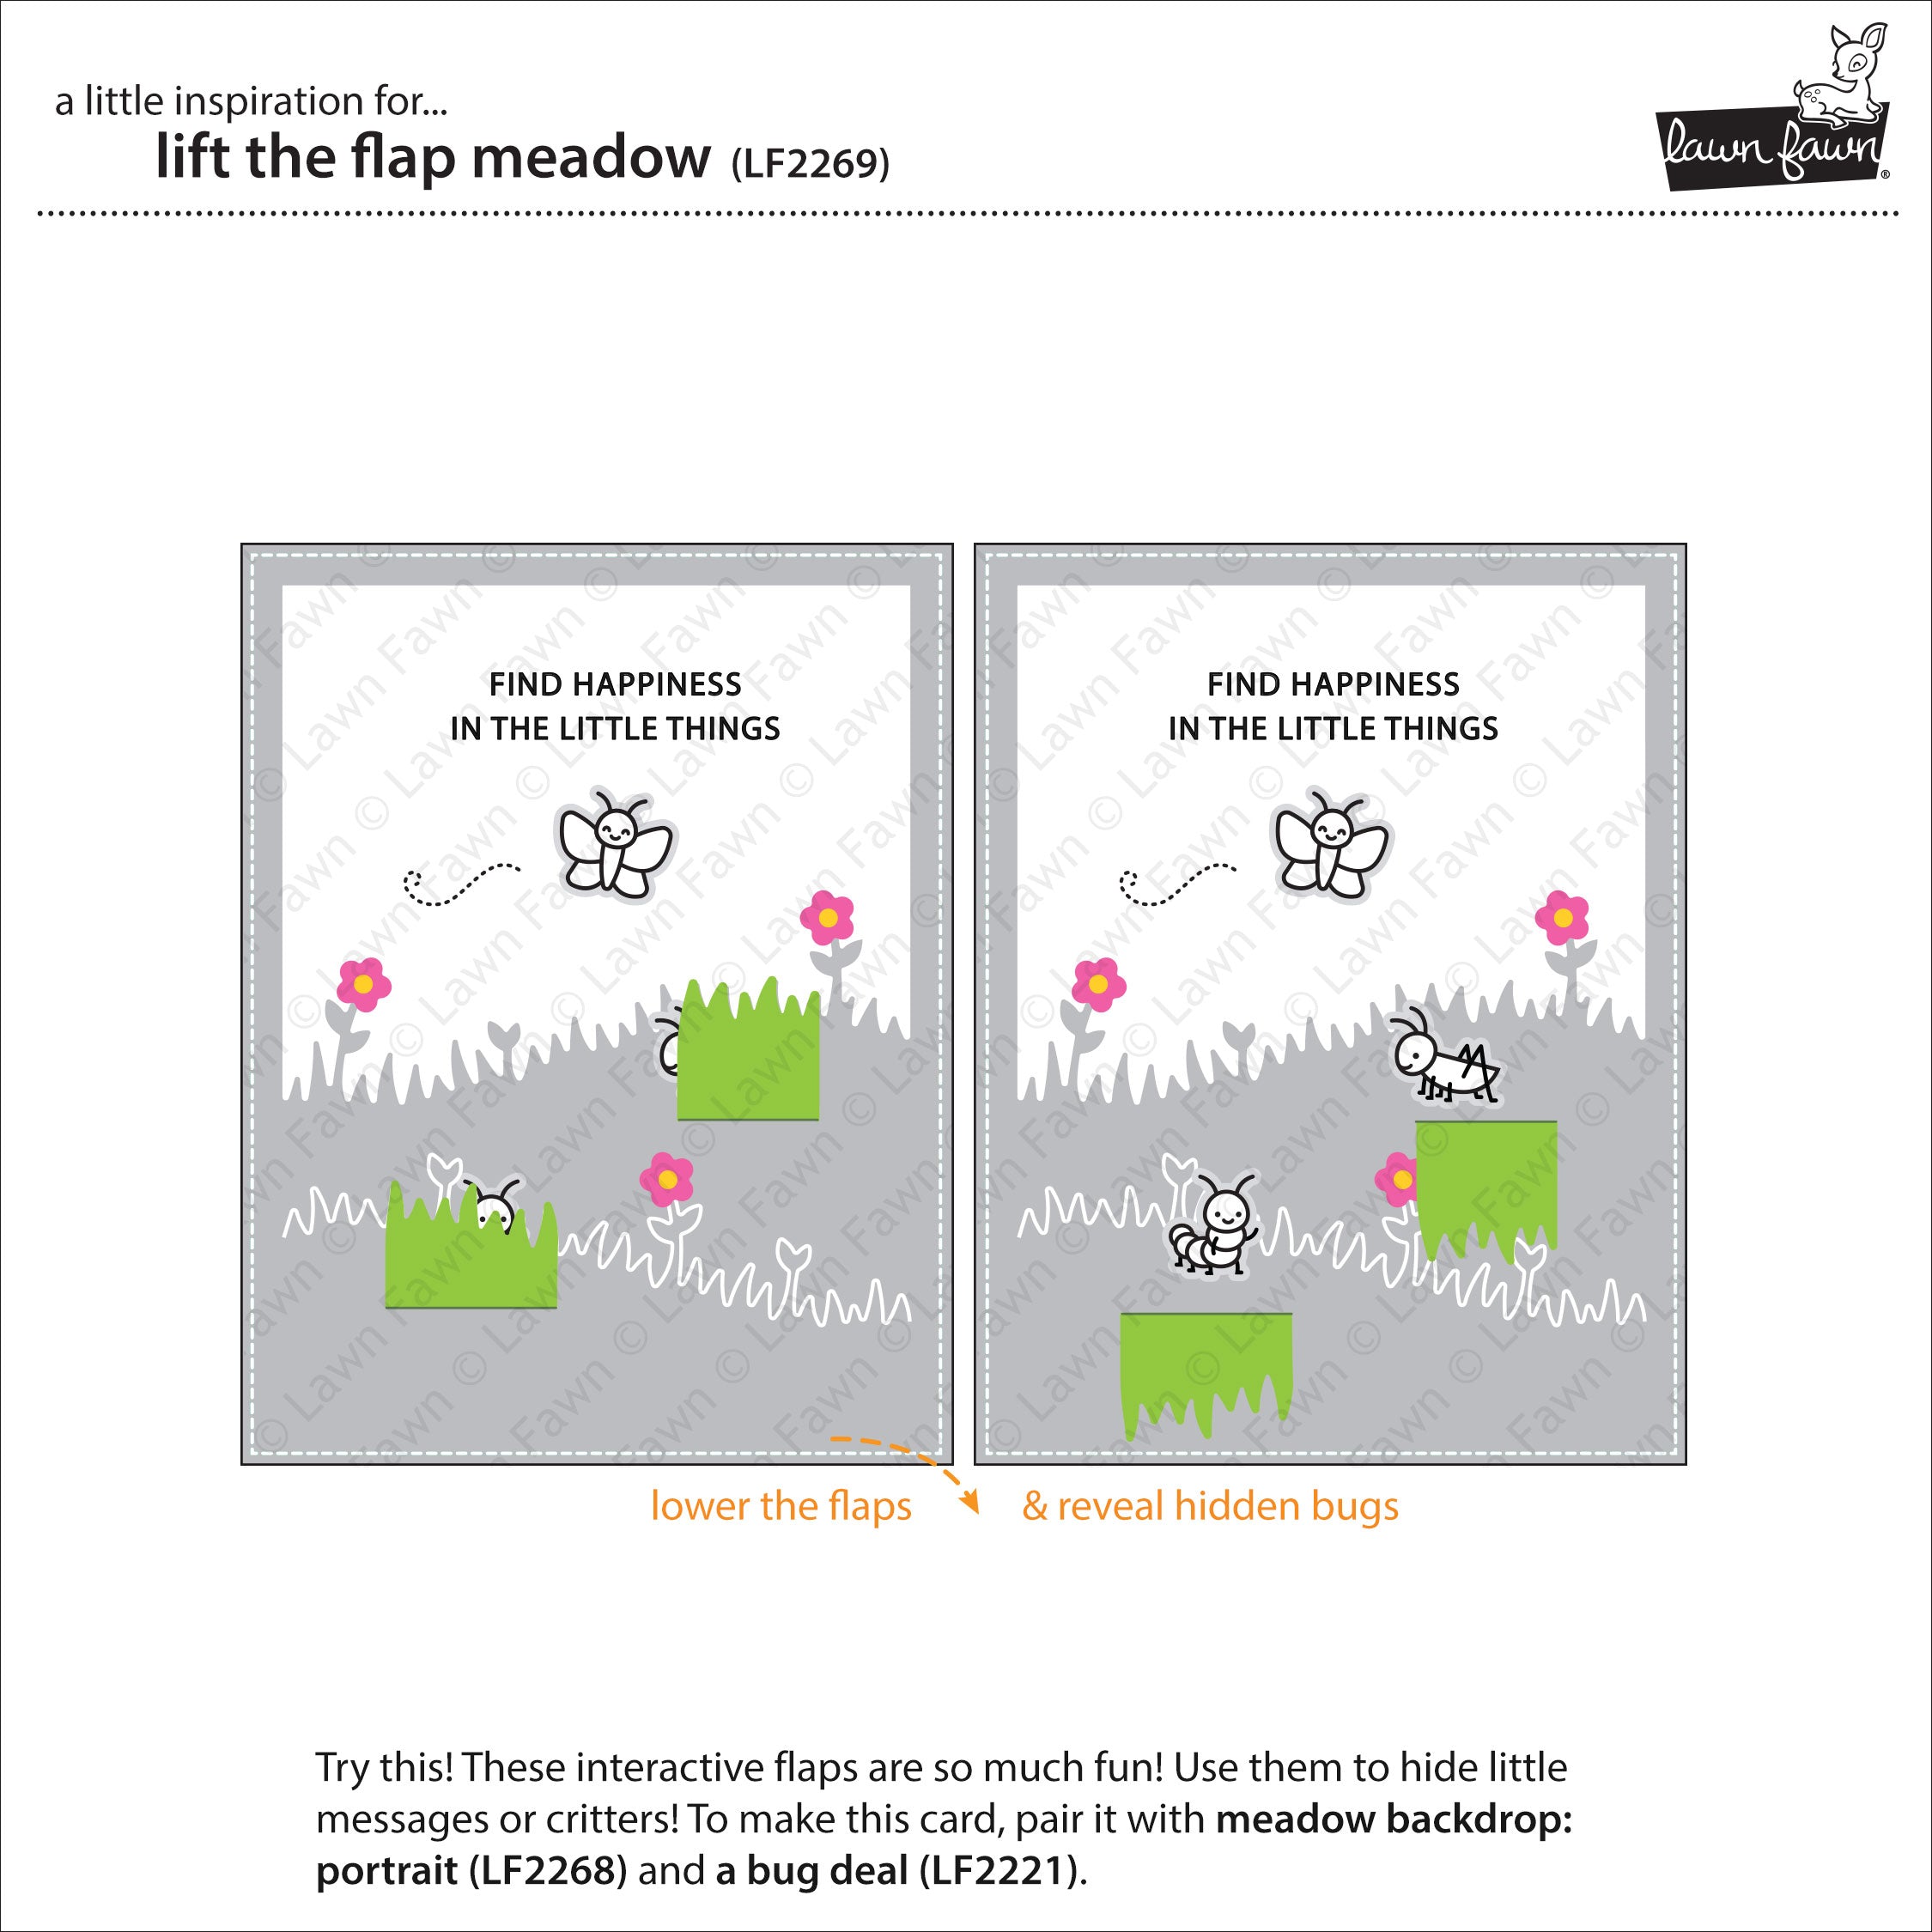 lift the flap meadow